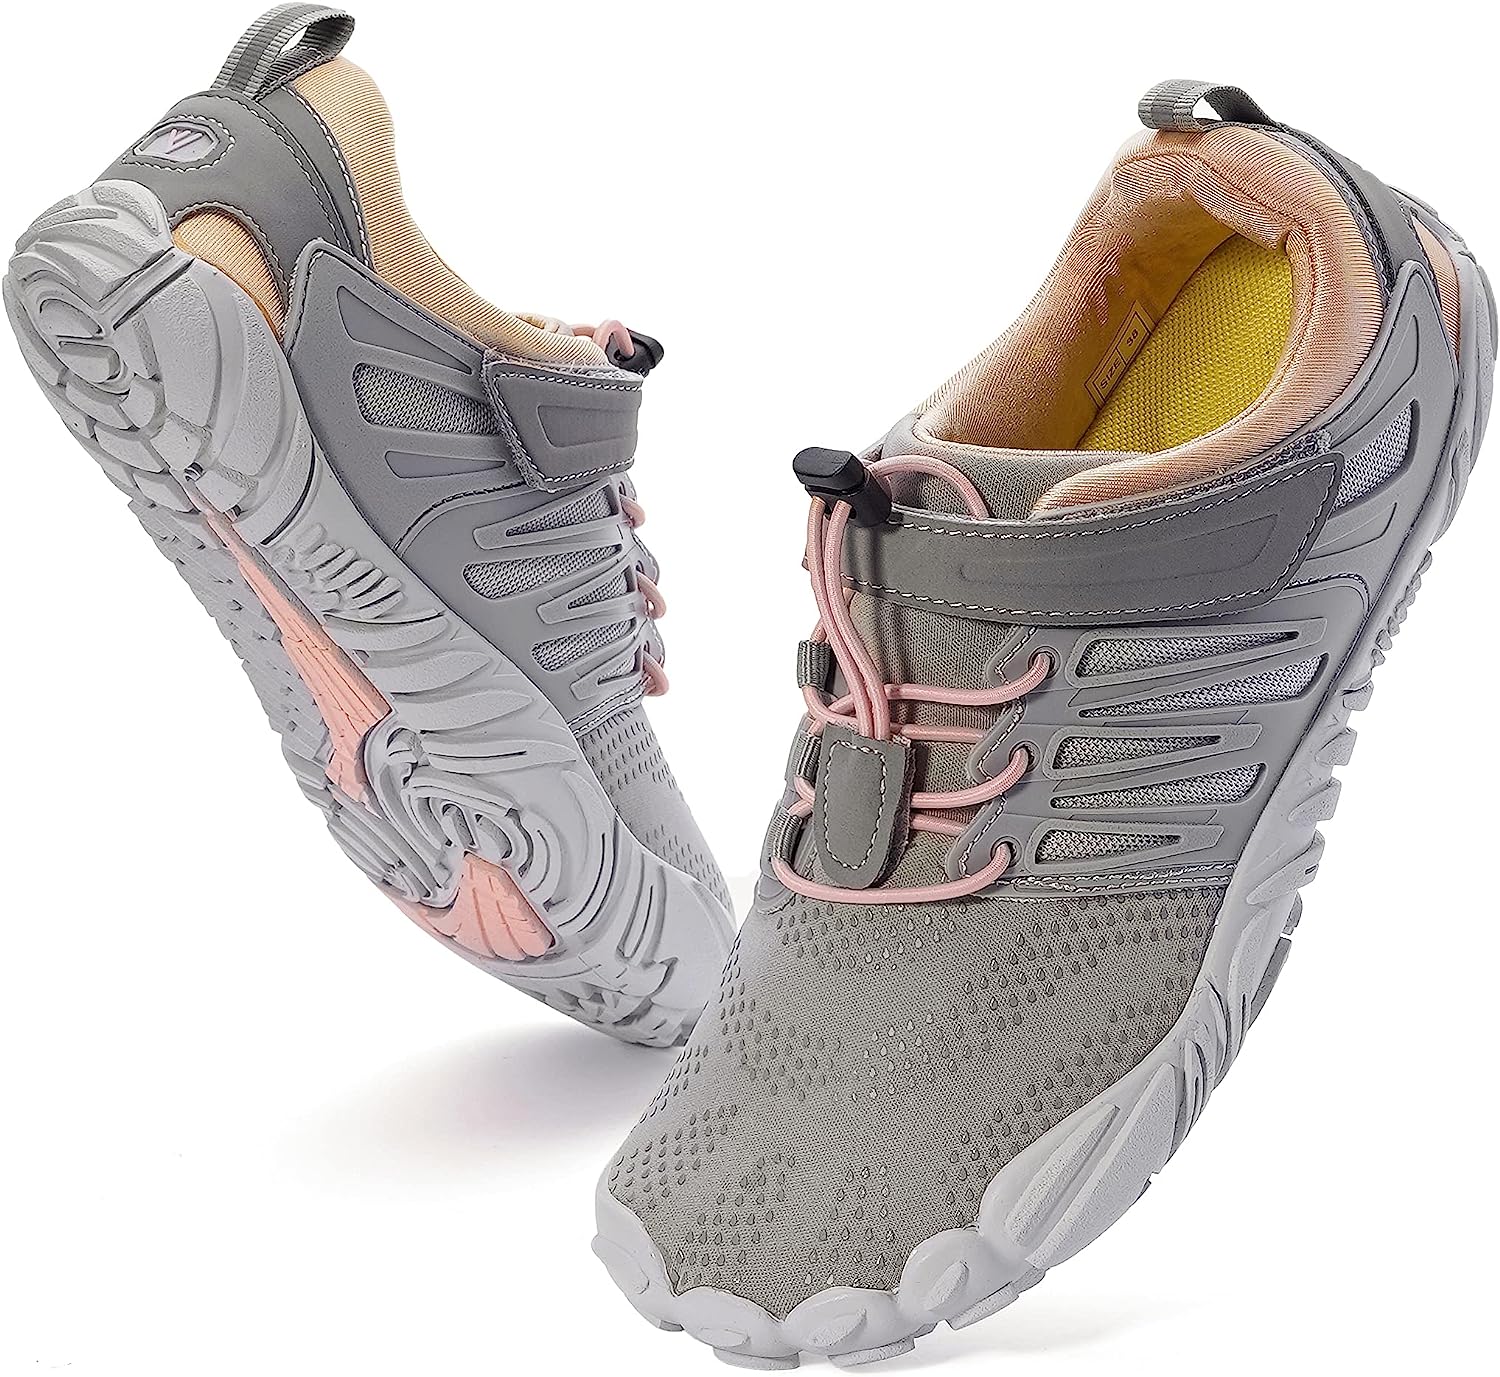 shoes for arthritic feet product comparison